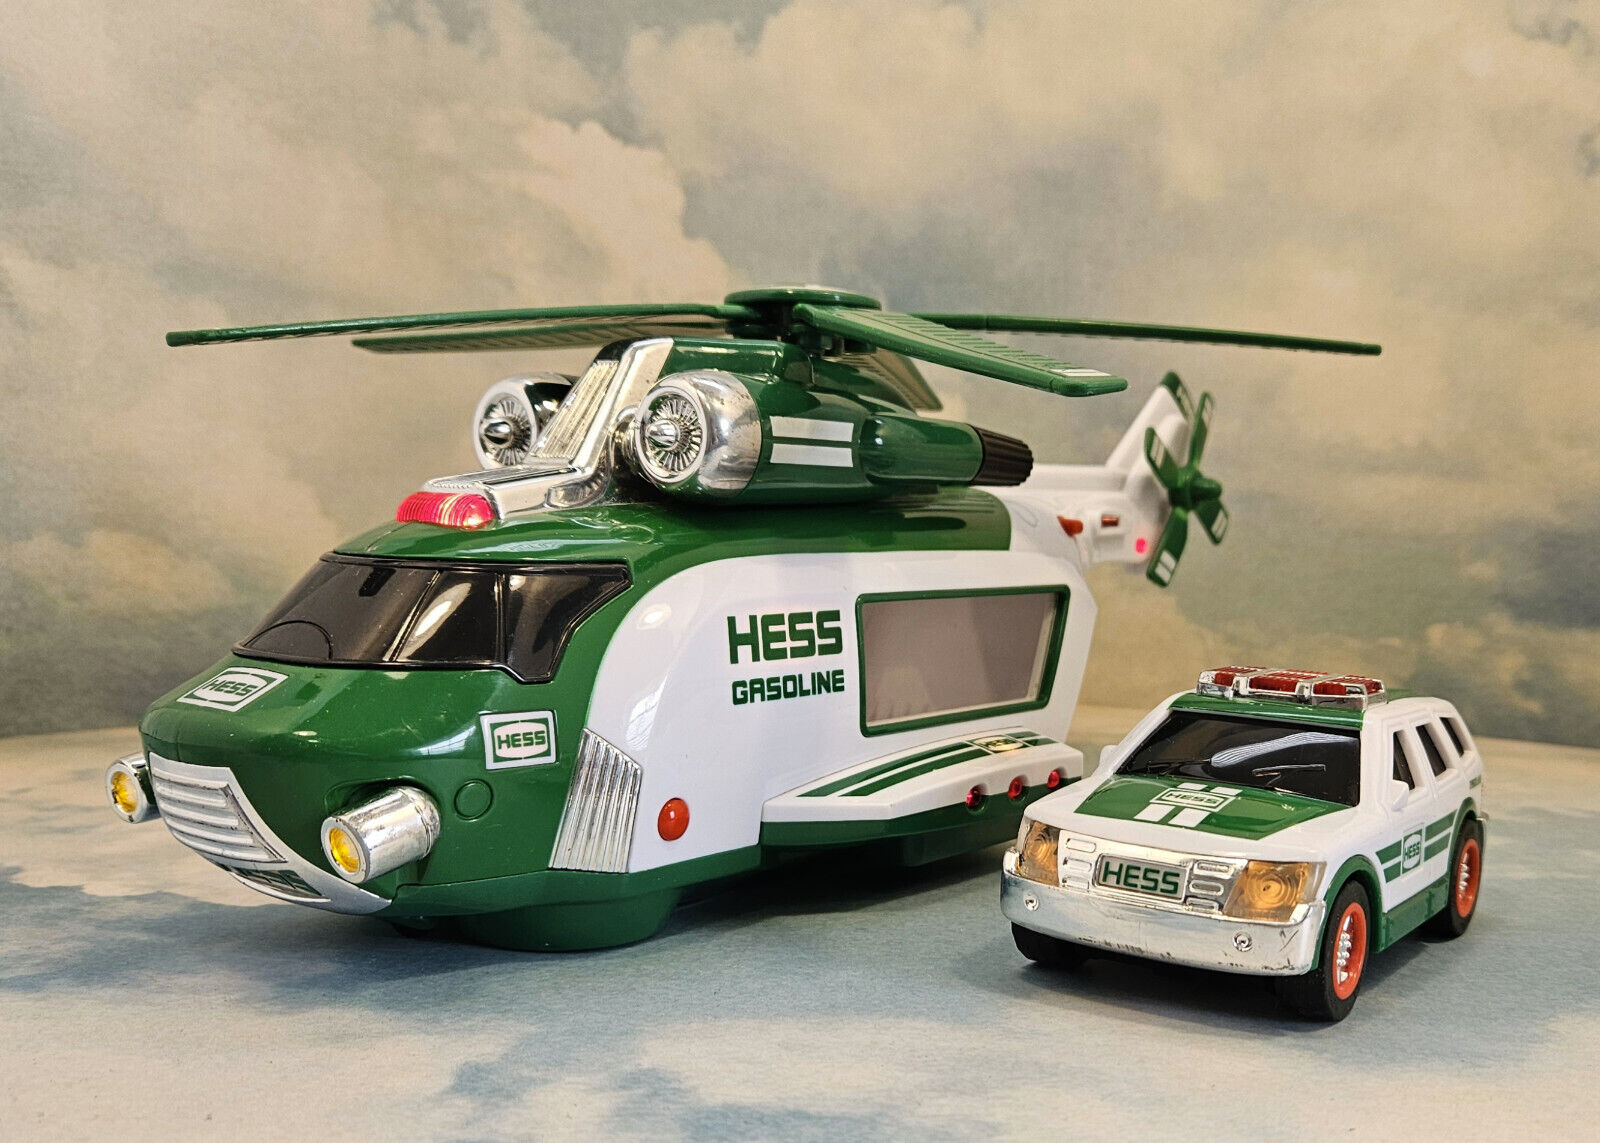 Original HESS 2012 Collectible Helicopter & Rescue Vehicle 